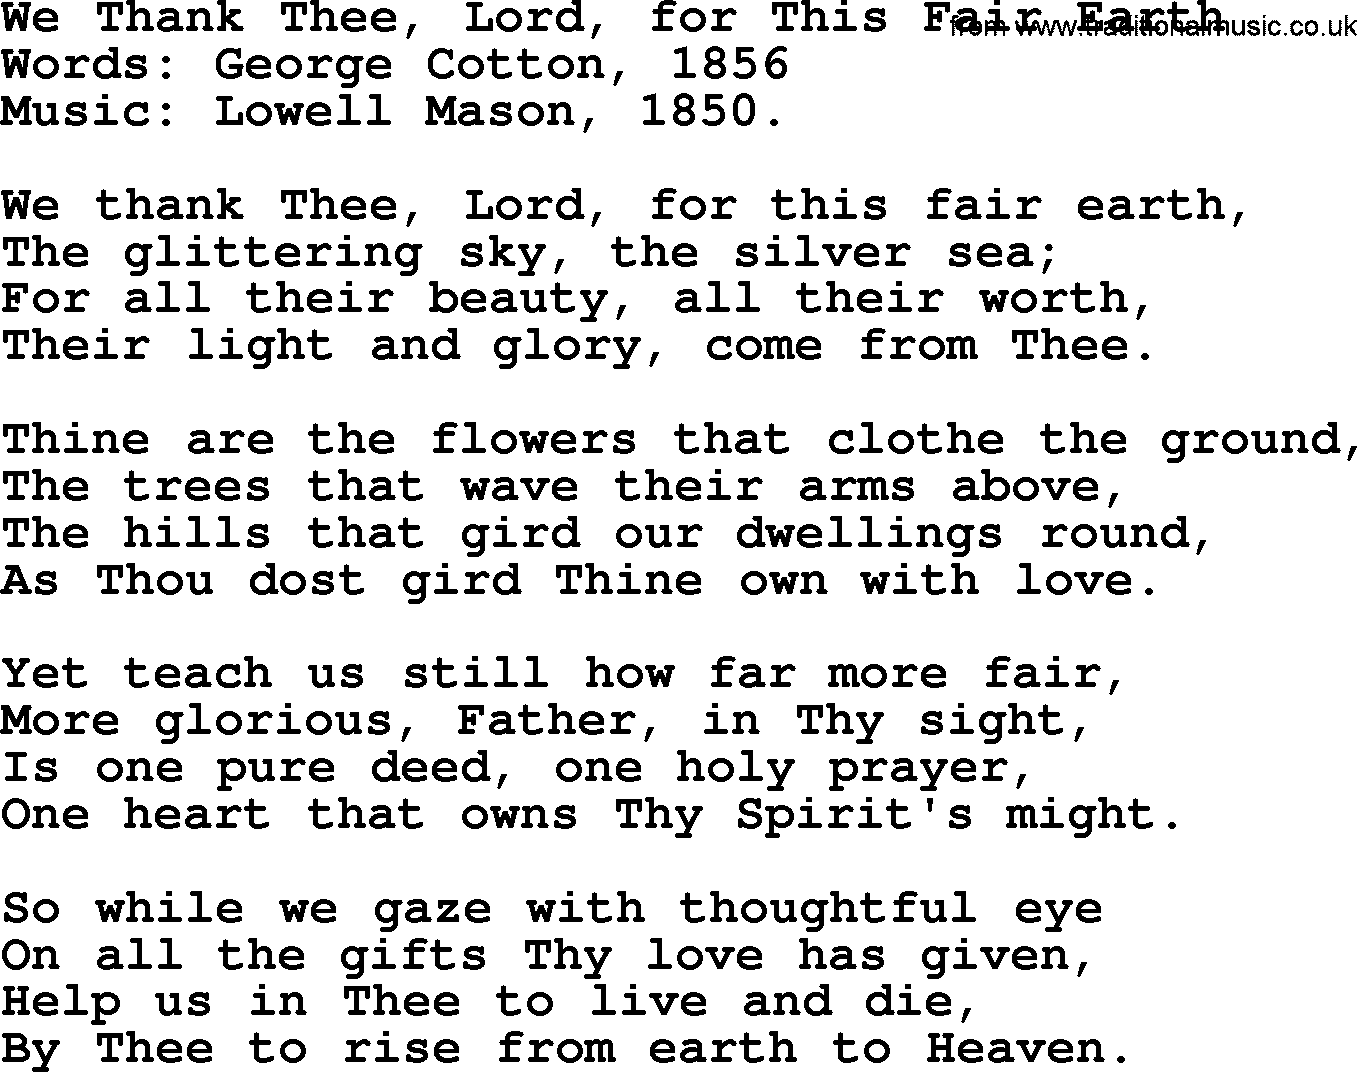 Thanksgiving Hymns and Songs: We Thank Thee, Lord, For This Fair Earth lyrics with PDF